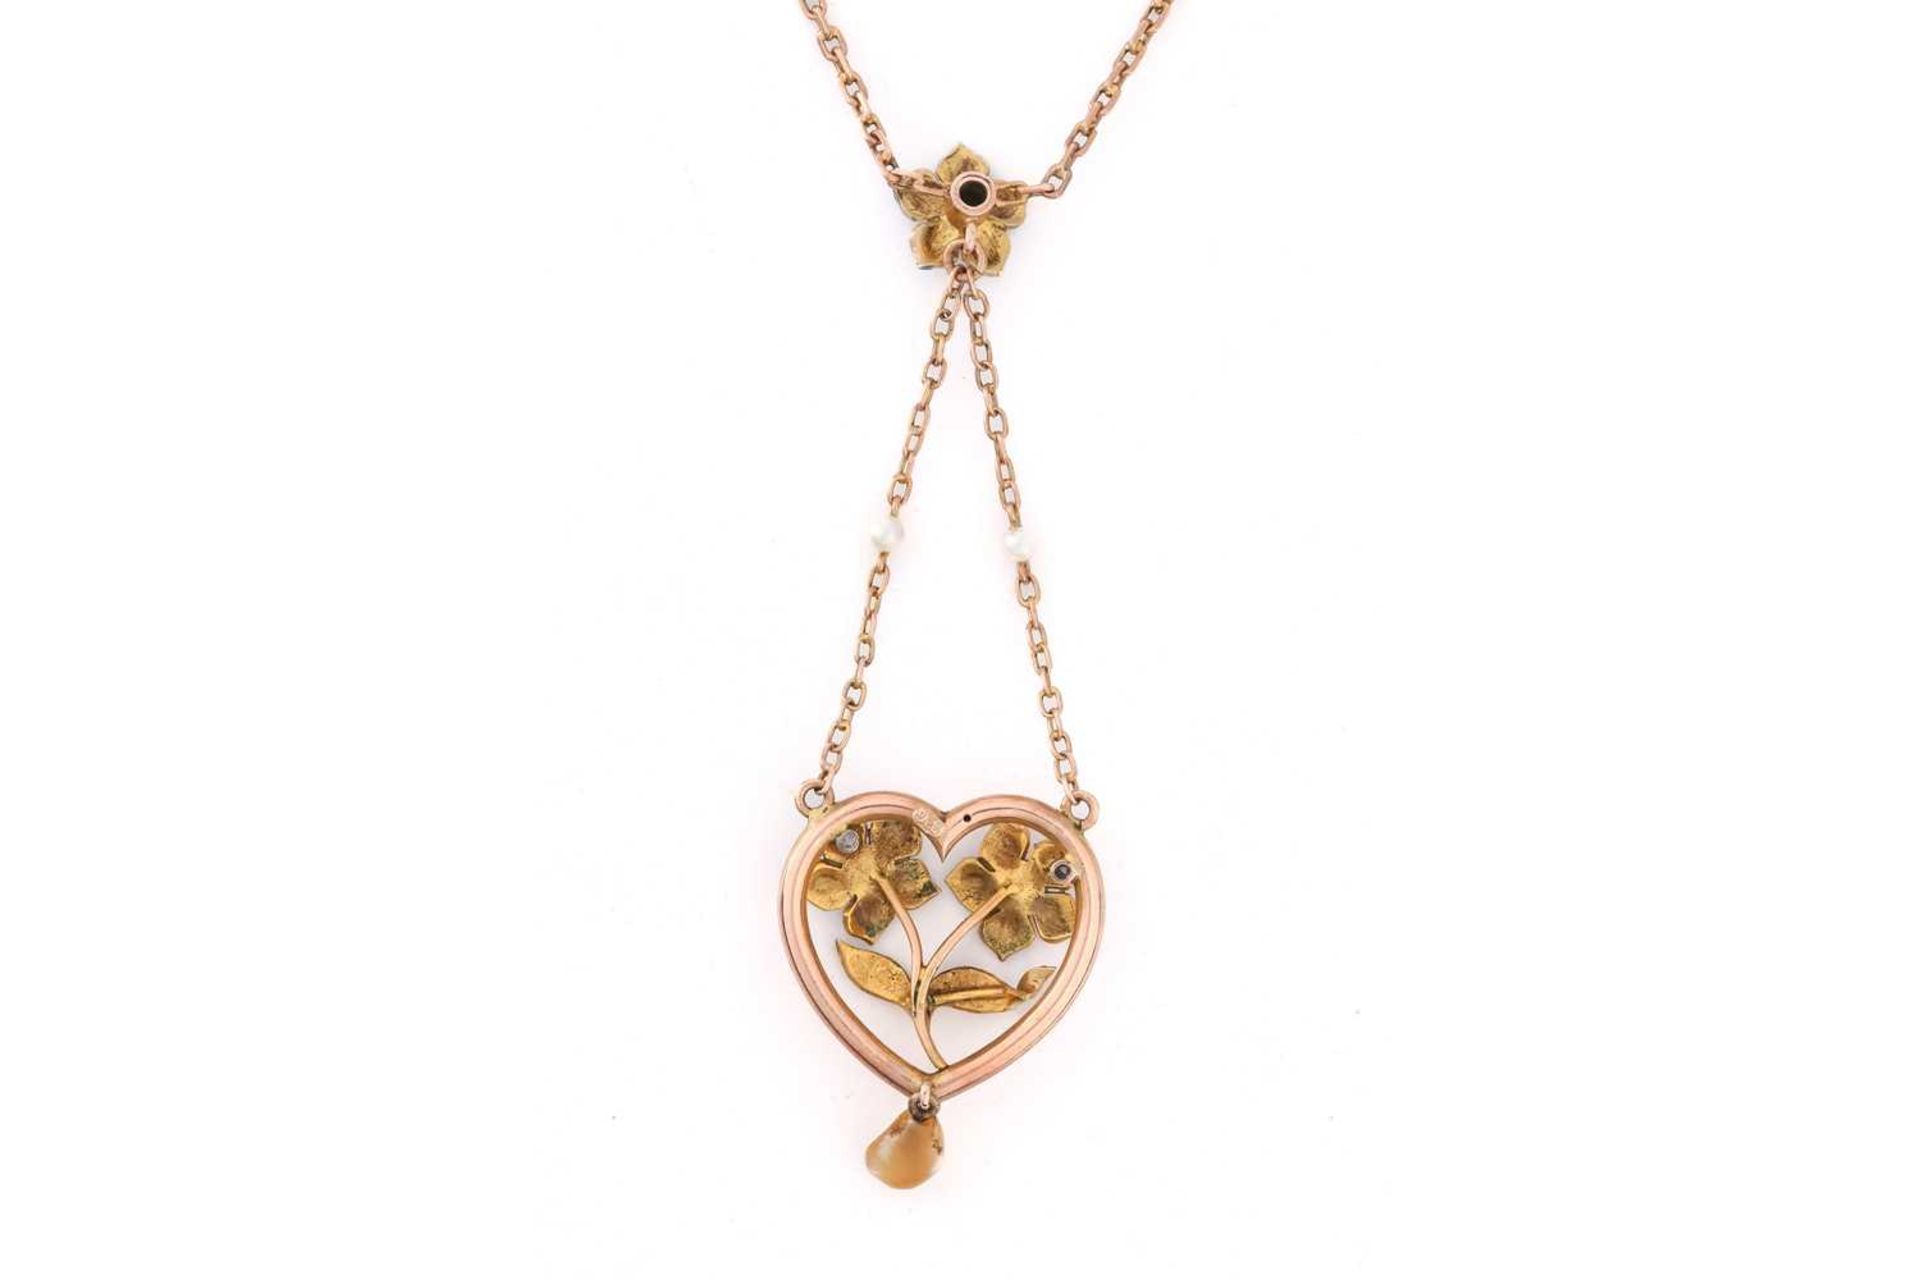 An Edwardian enamel and pearl floral pendant necklace designed as a heart with a spray of flowers in - Image 5 of 8